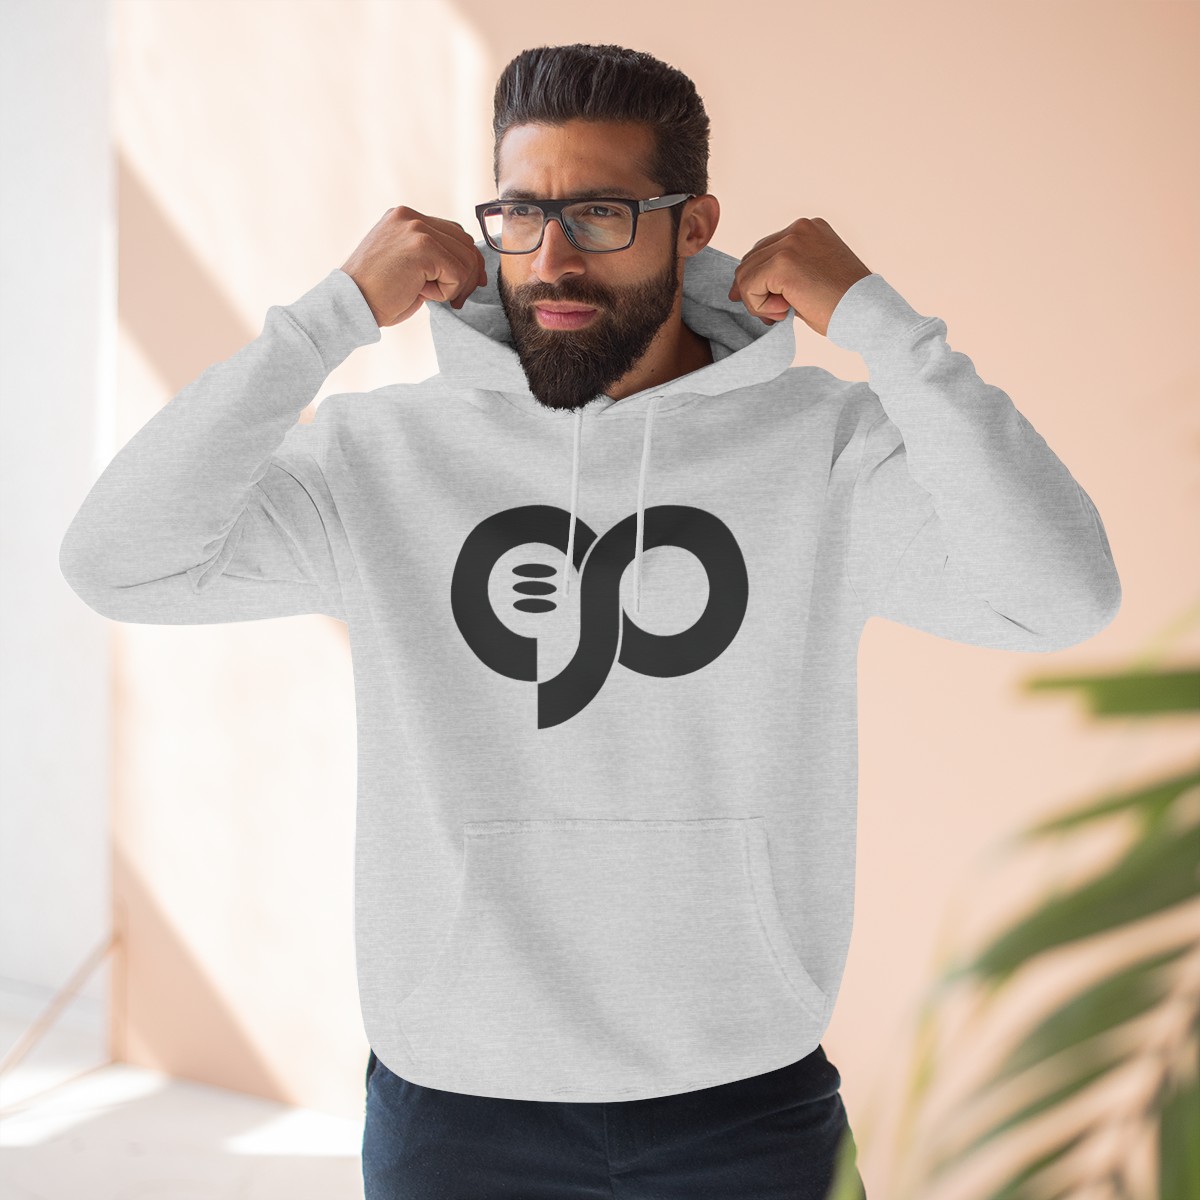 Expansion Project | Premium Hoodie product thumbnail image